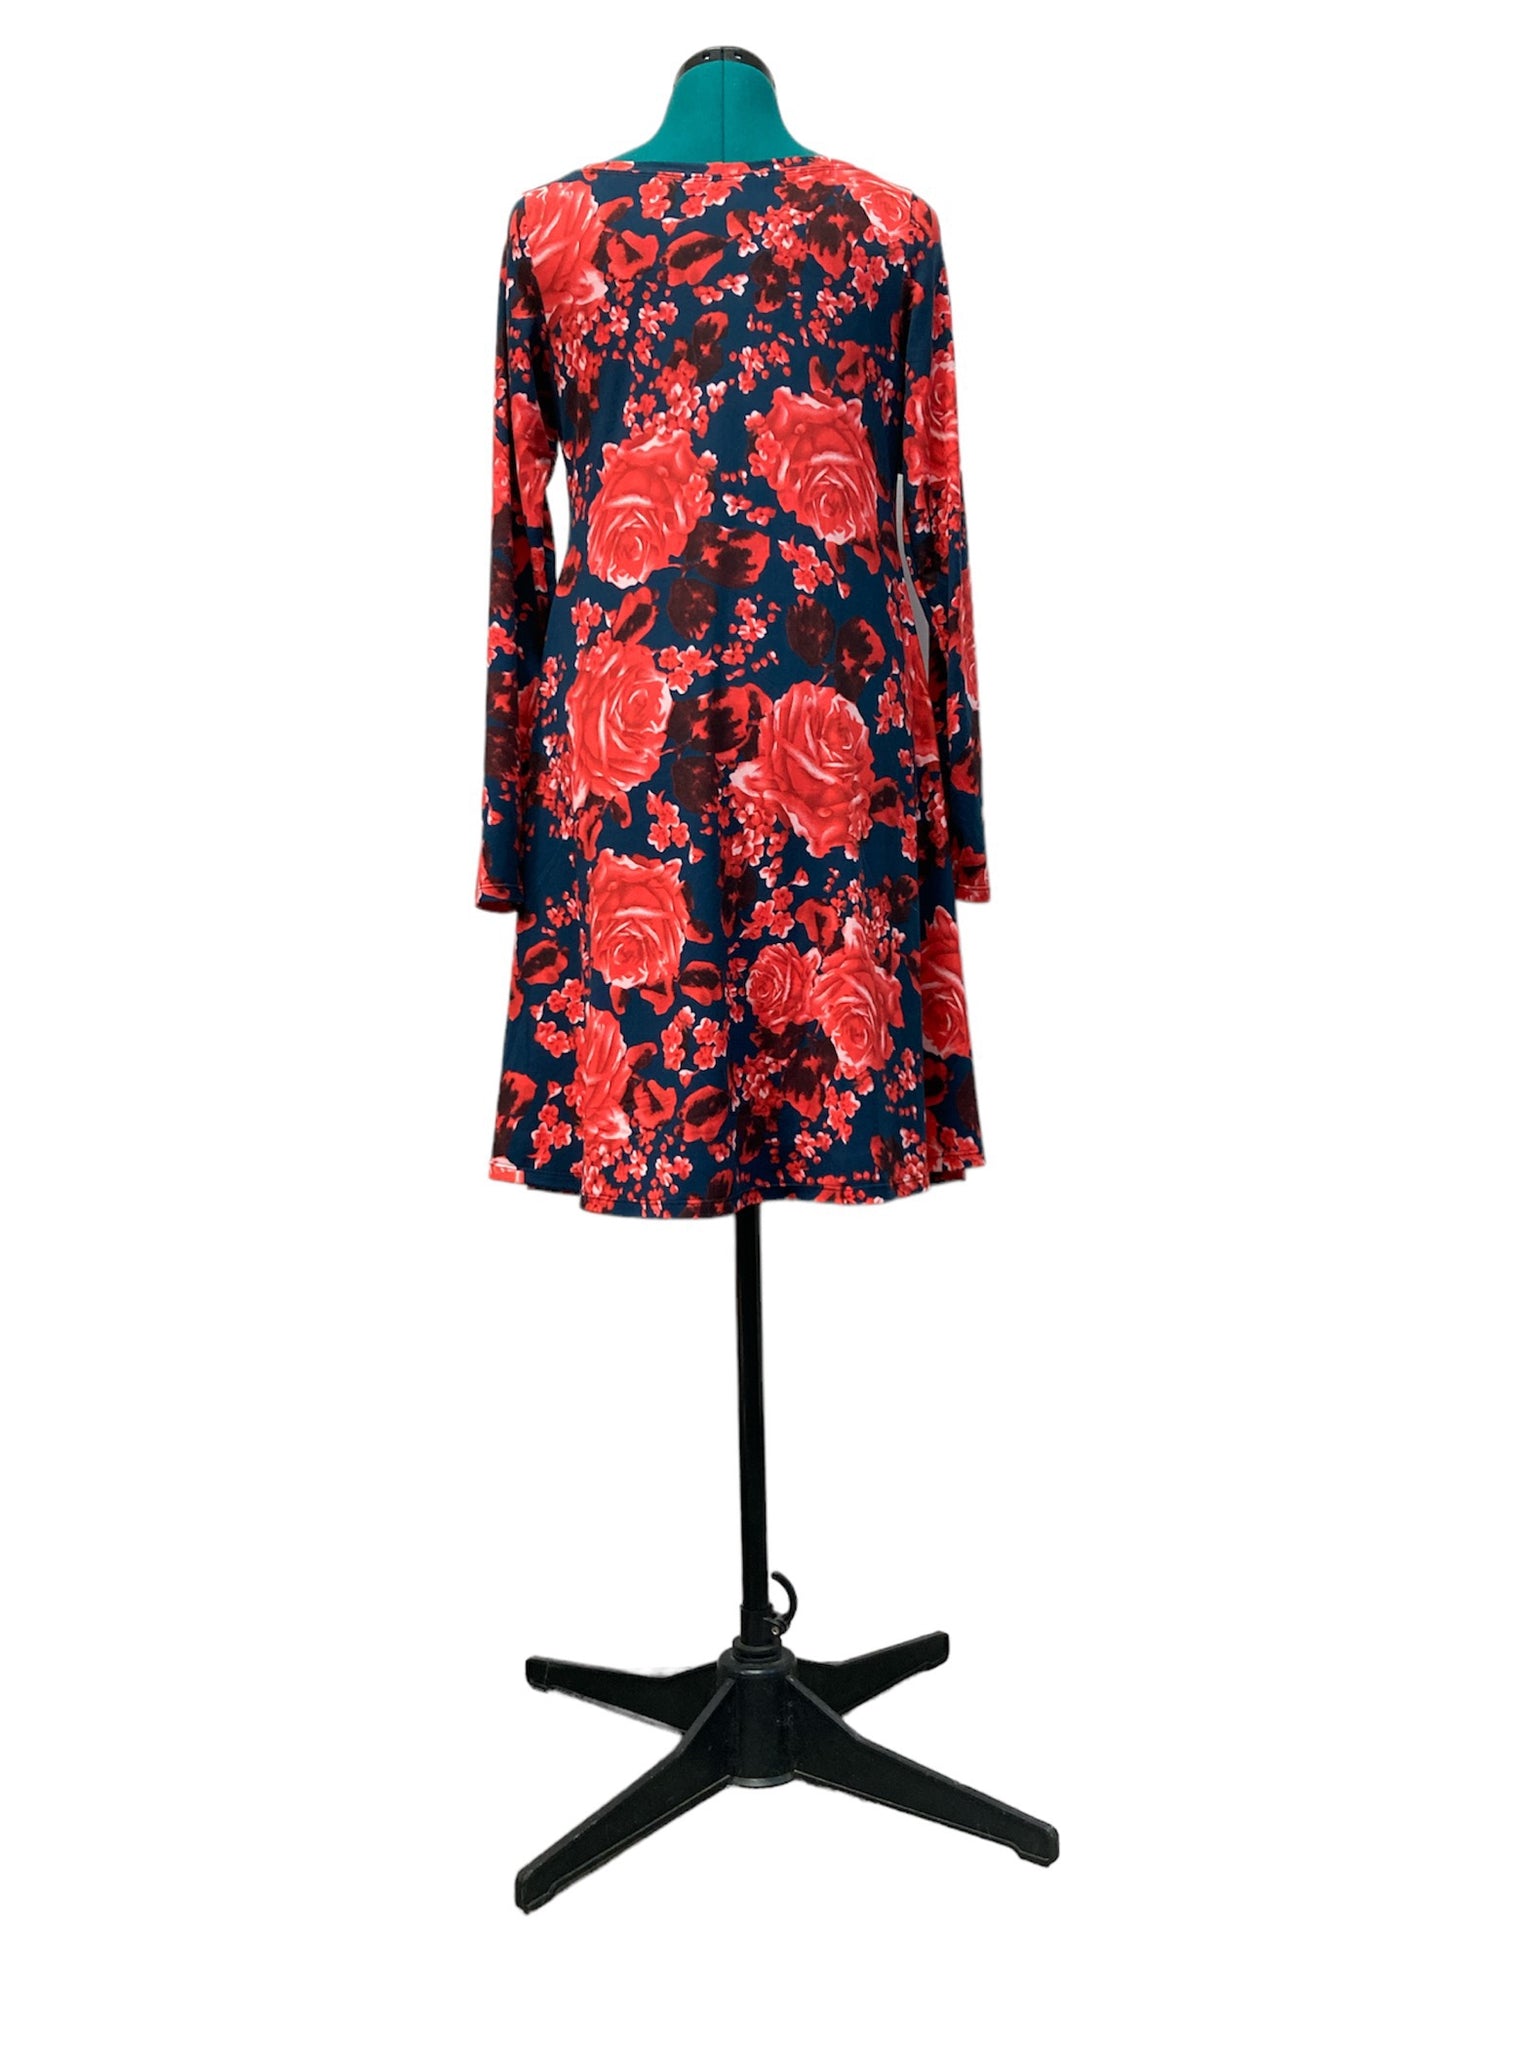 Ladies Swing Dress in Red Roses on Navy Size 6/8